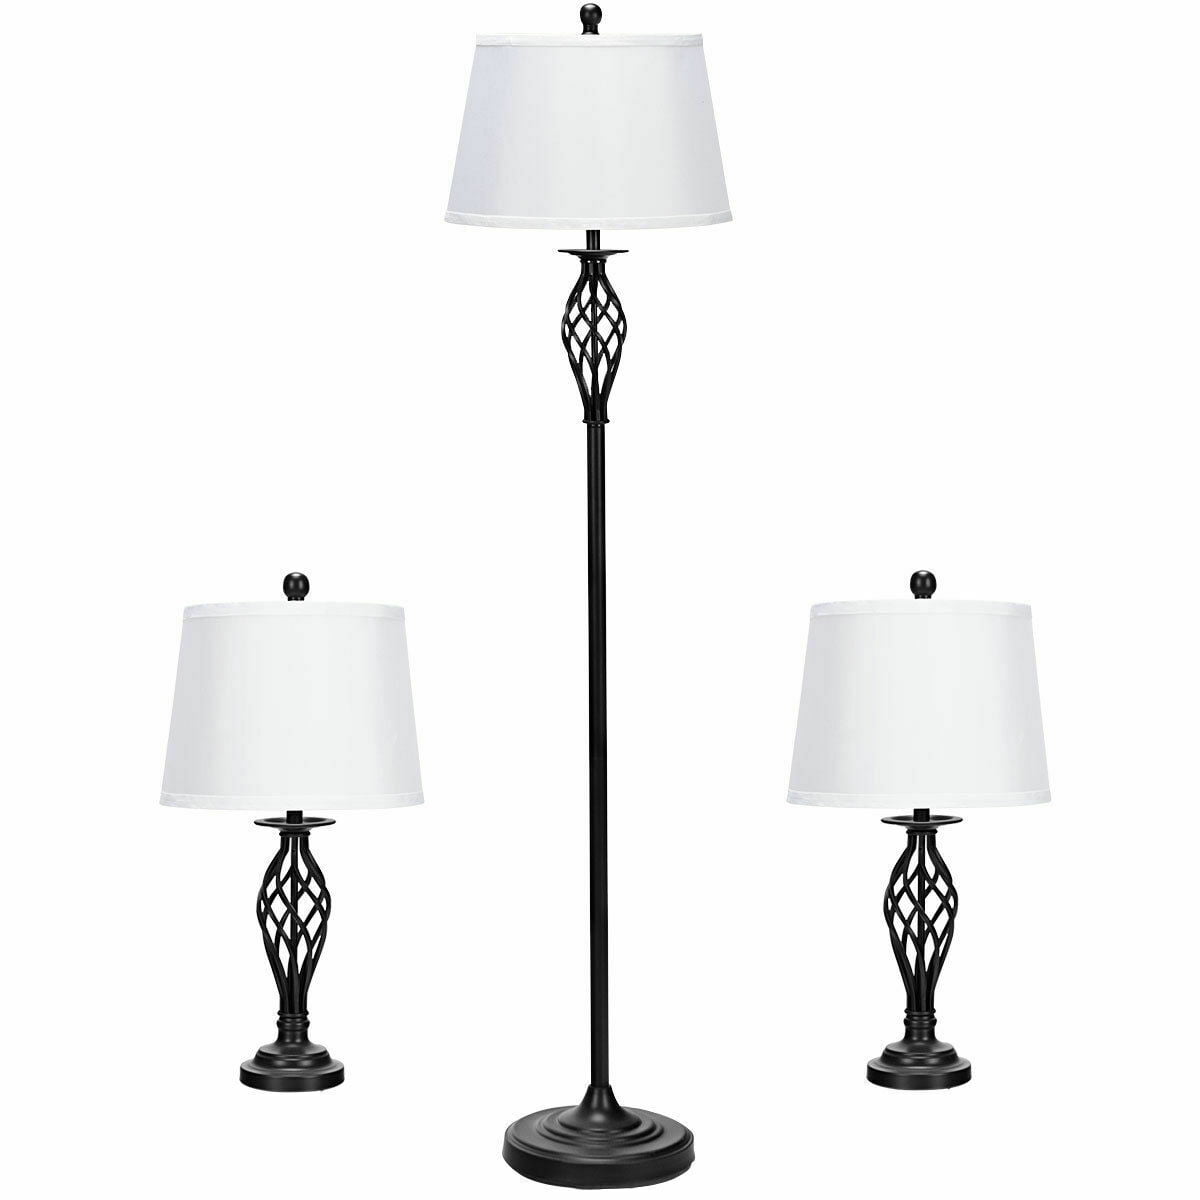 3-Piece Lamp Set 2 Table Lamps 1 Floor Lamp Fabric Shades for Living